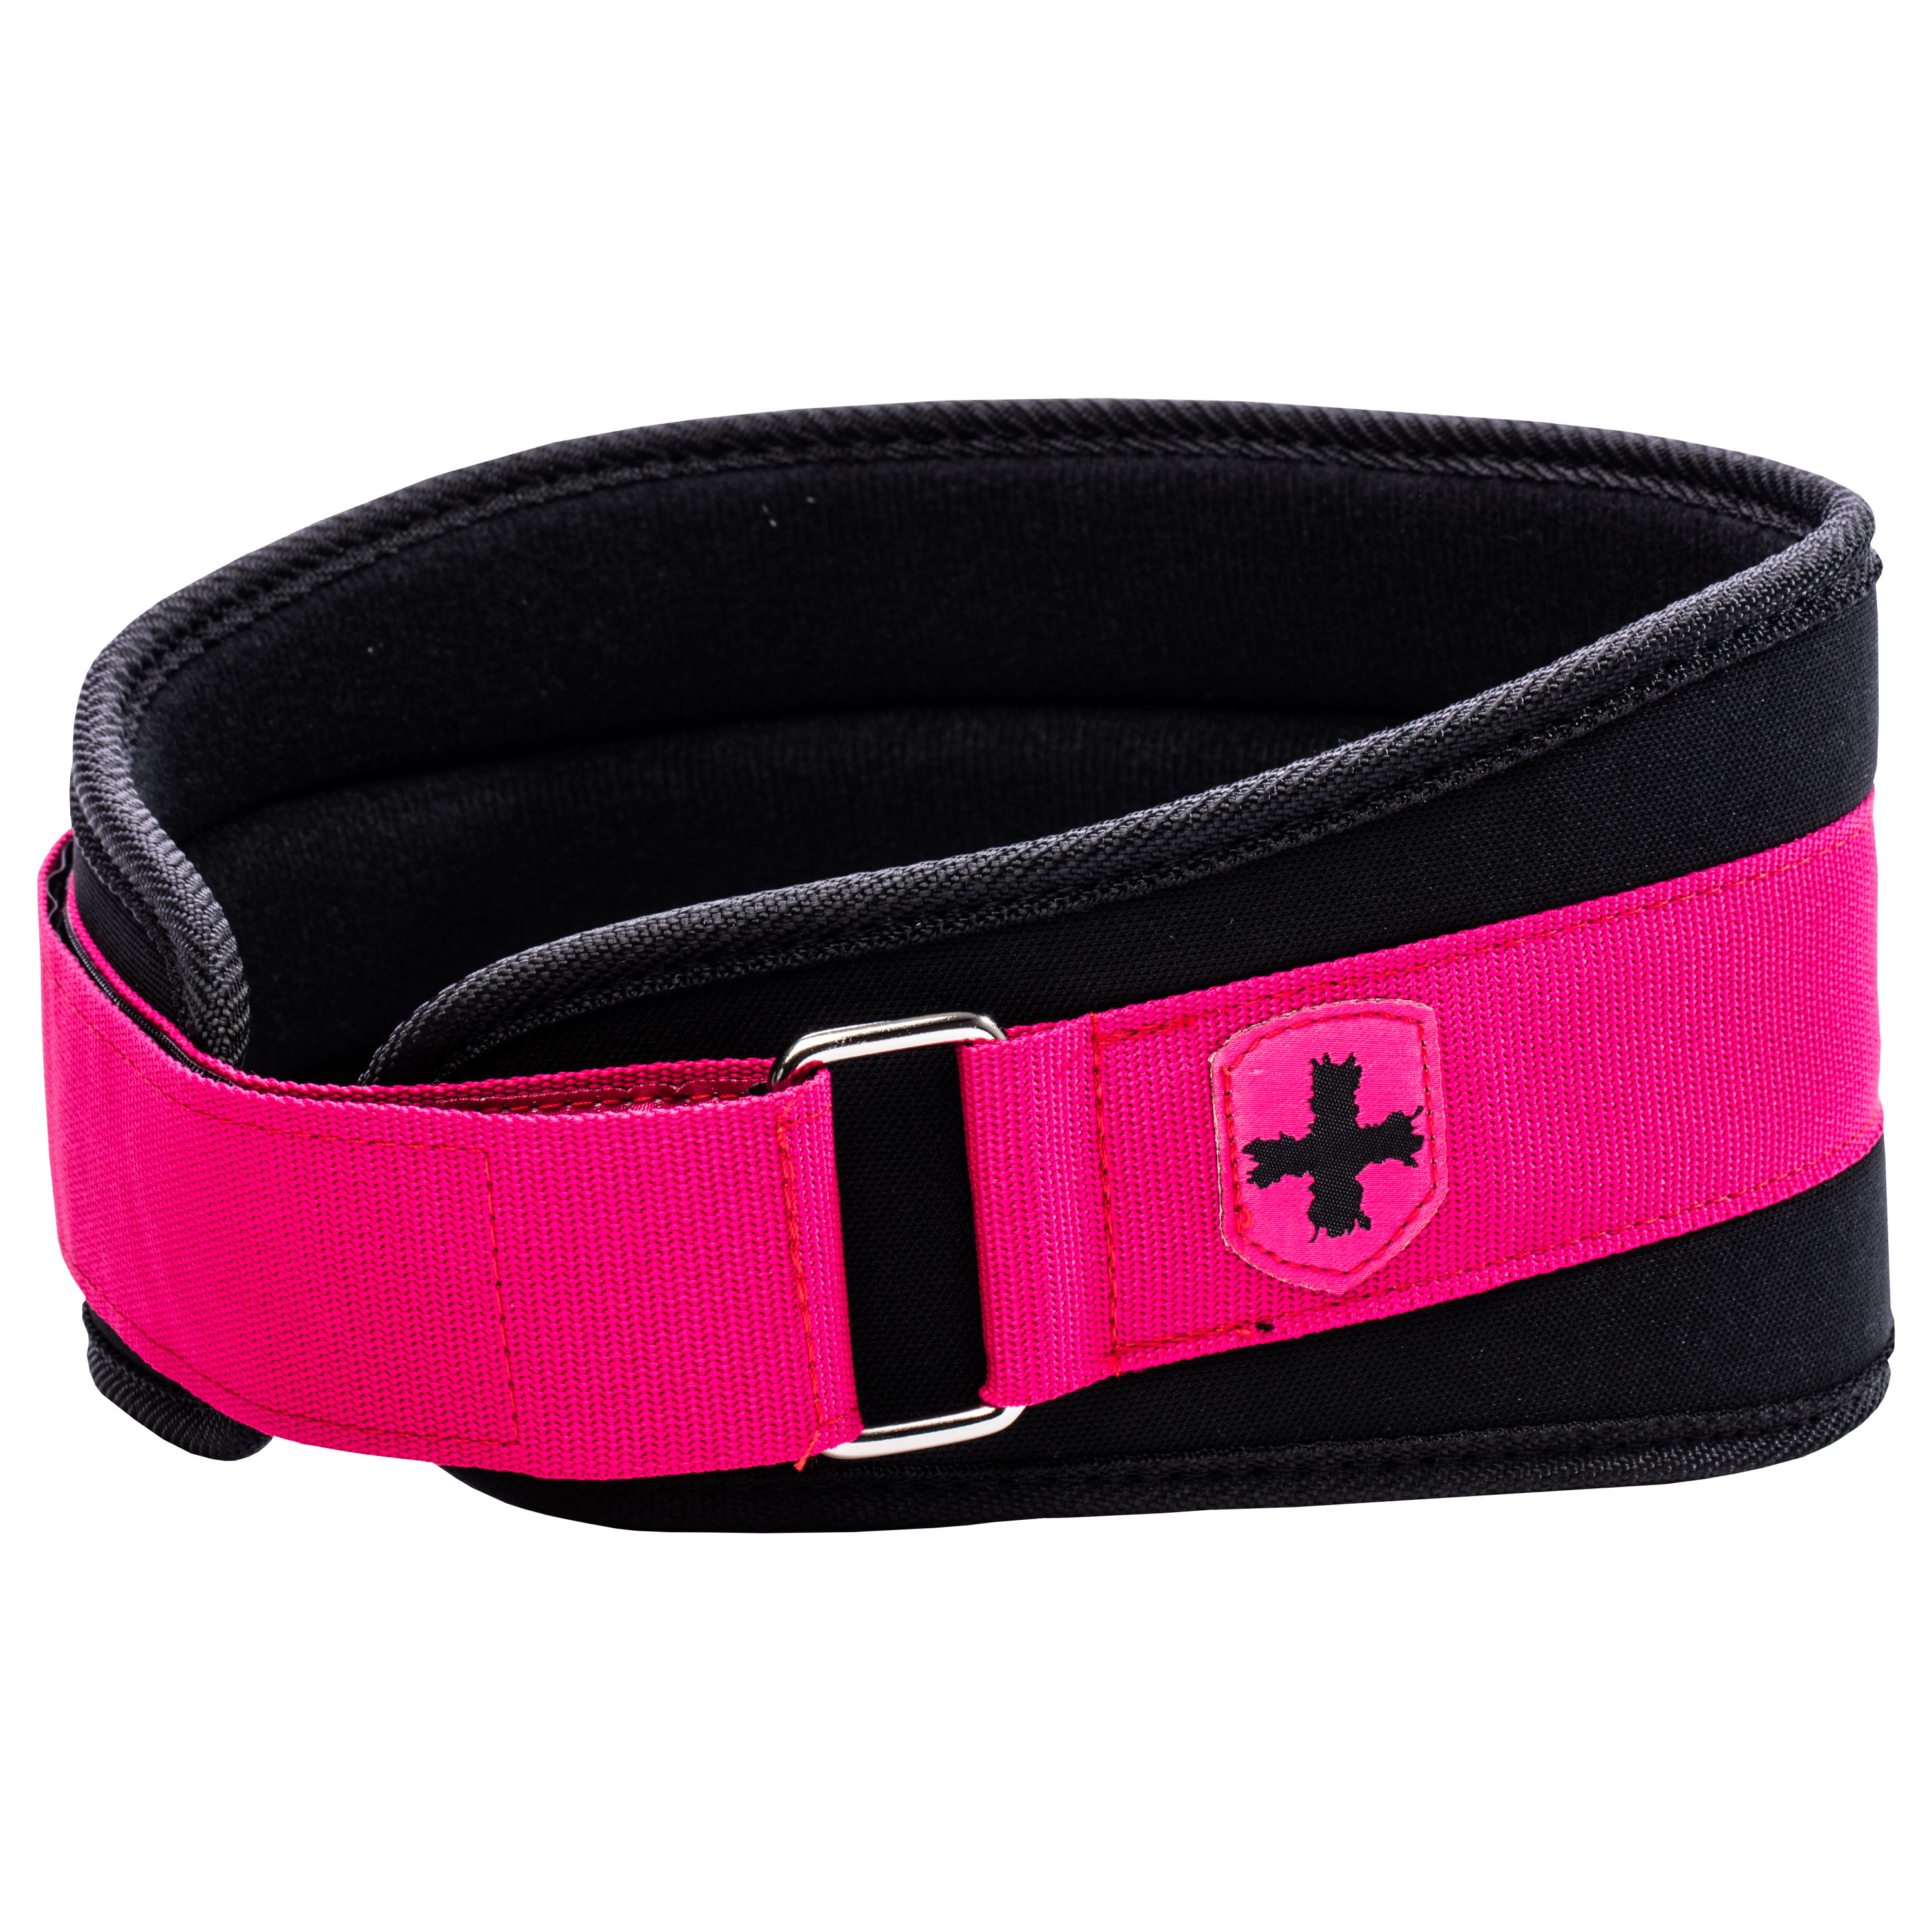 Weightlifting belt from article "5 Crossfit Essentials to boost performance"